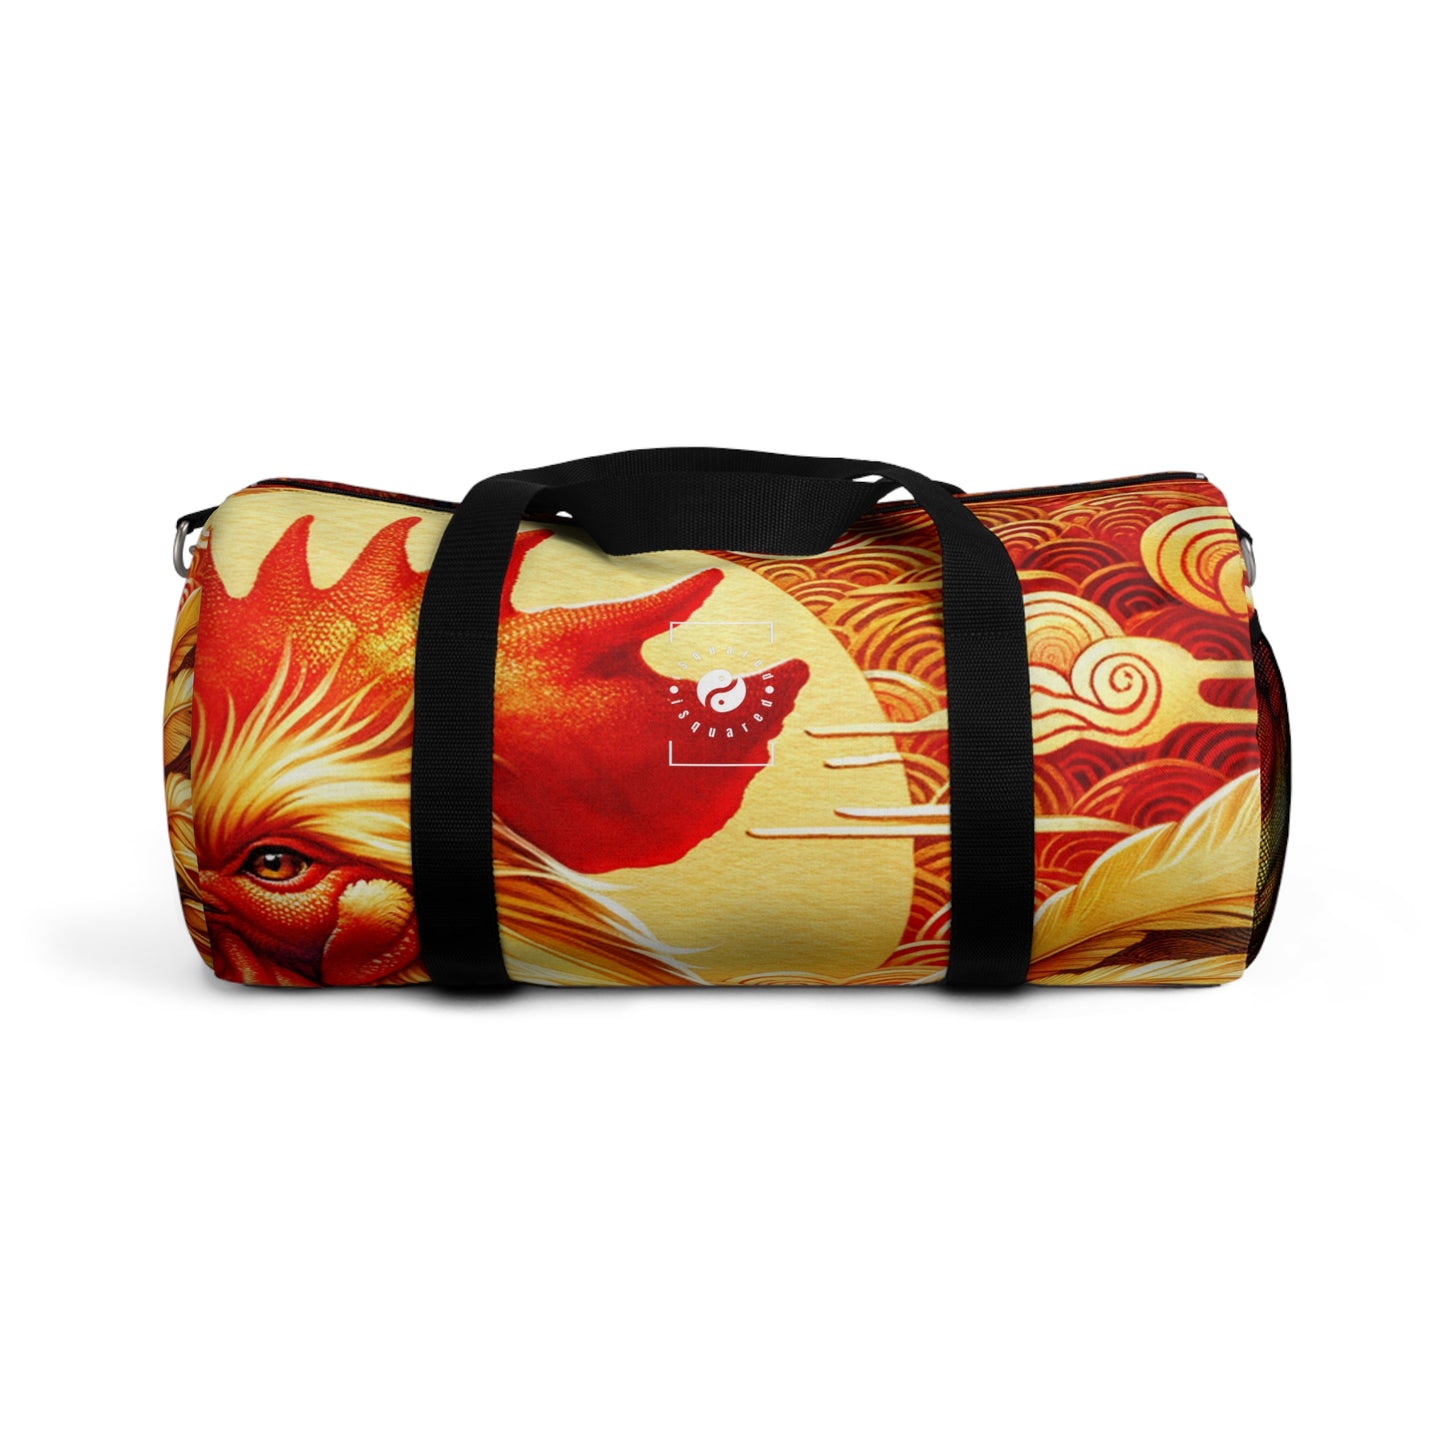 "Crimson Dawn: The Golden Rooster's Rebirth" - Duffle Bag